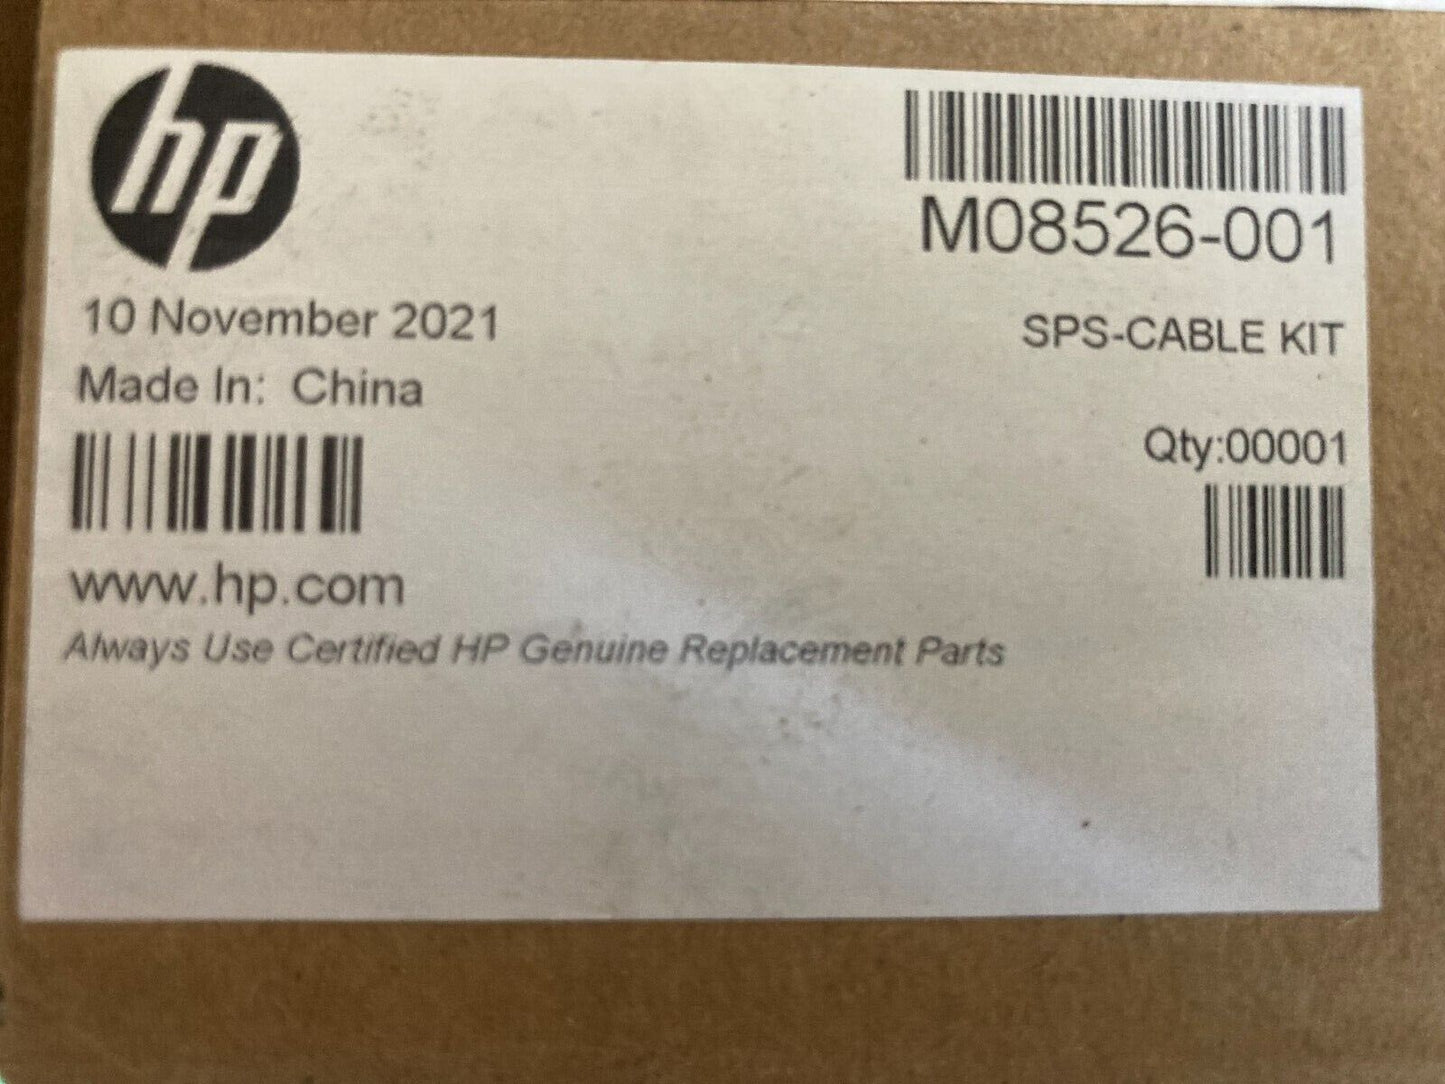 NEW IN BOX  HP M08526-001 CABLE KIT ELITEBOOK 830 835 G7 G8